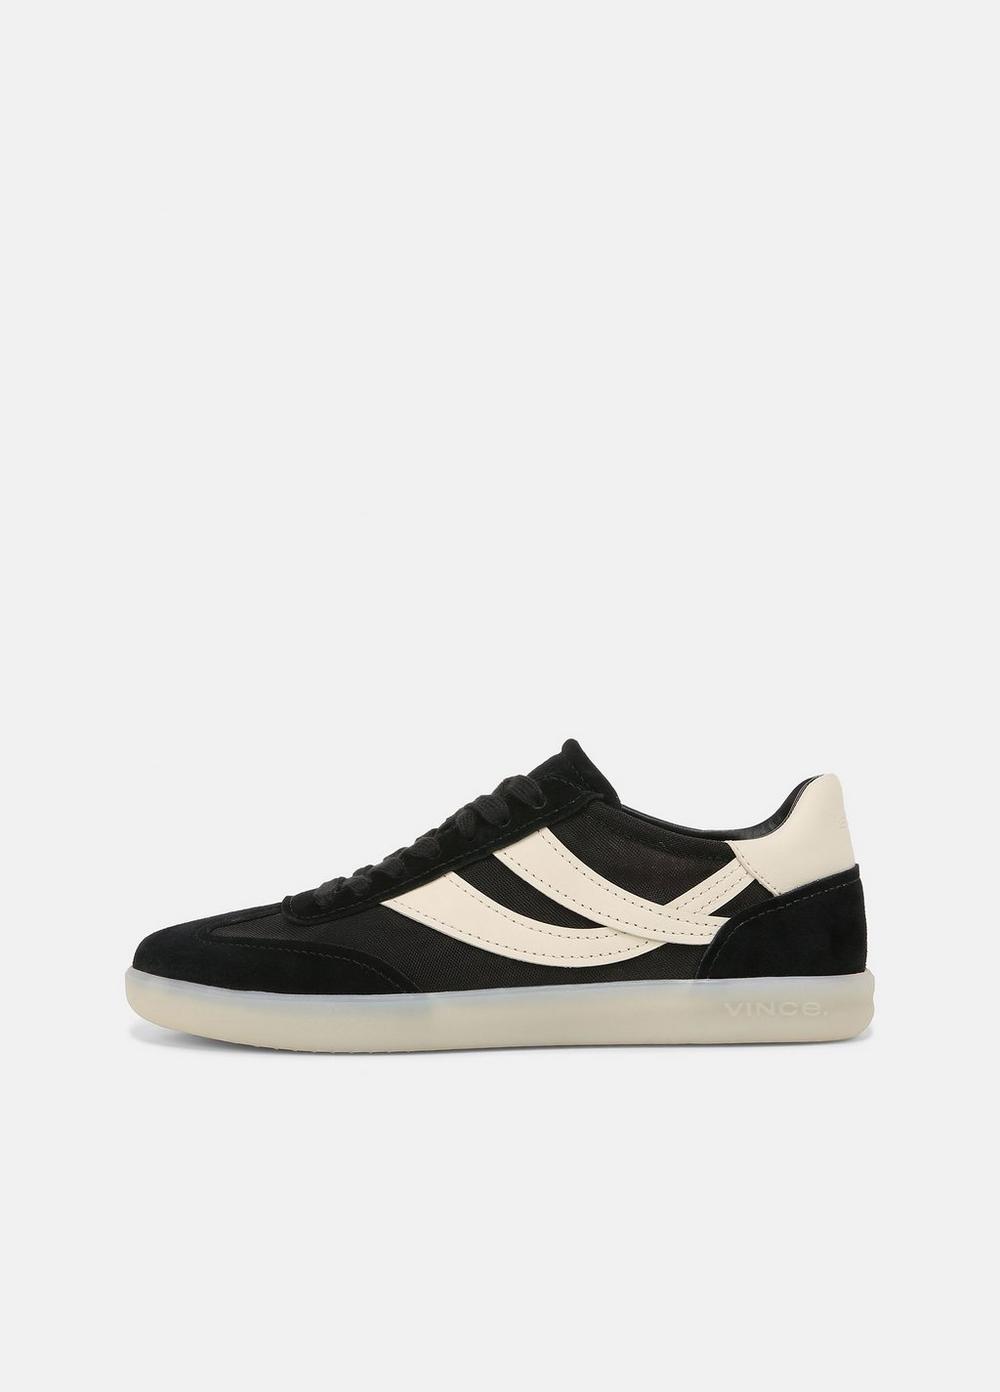 Oasis Leather And Suede Sneaker, Black, Size 9.5 Vince